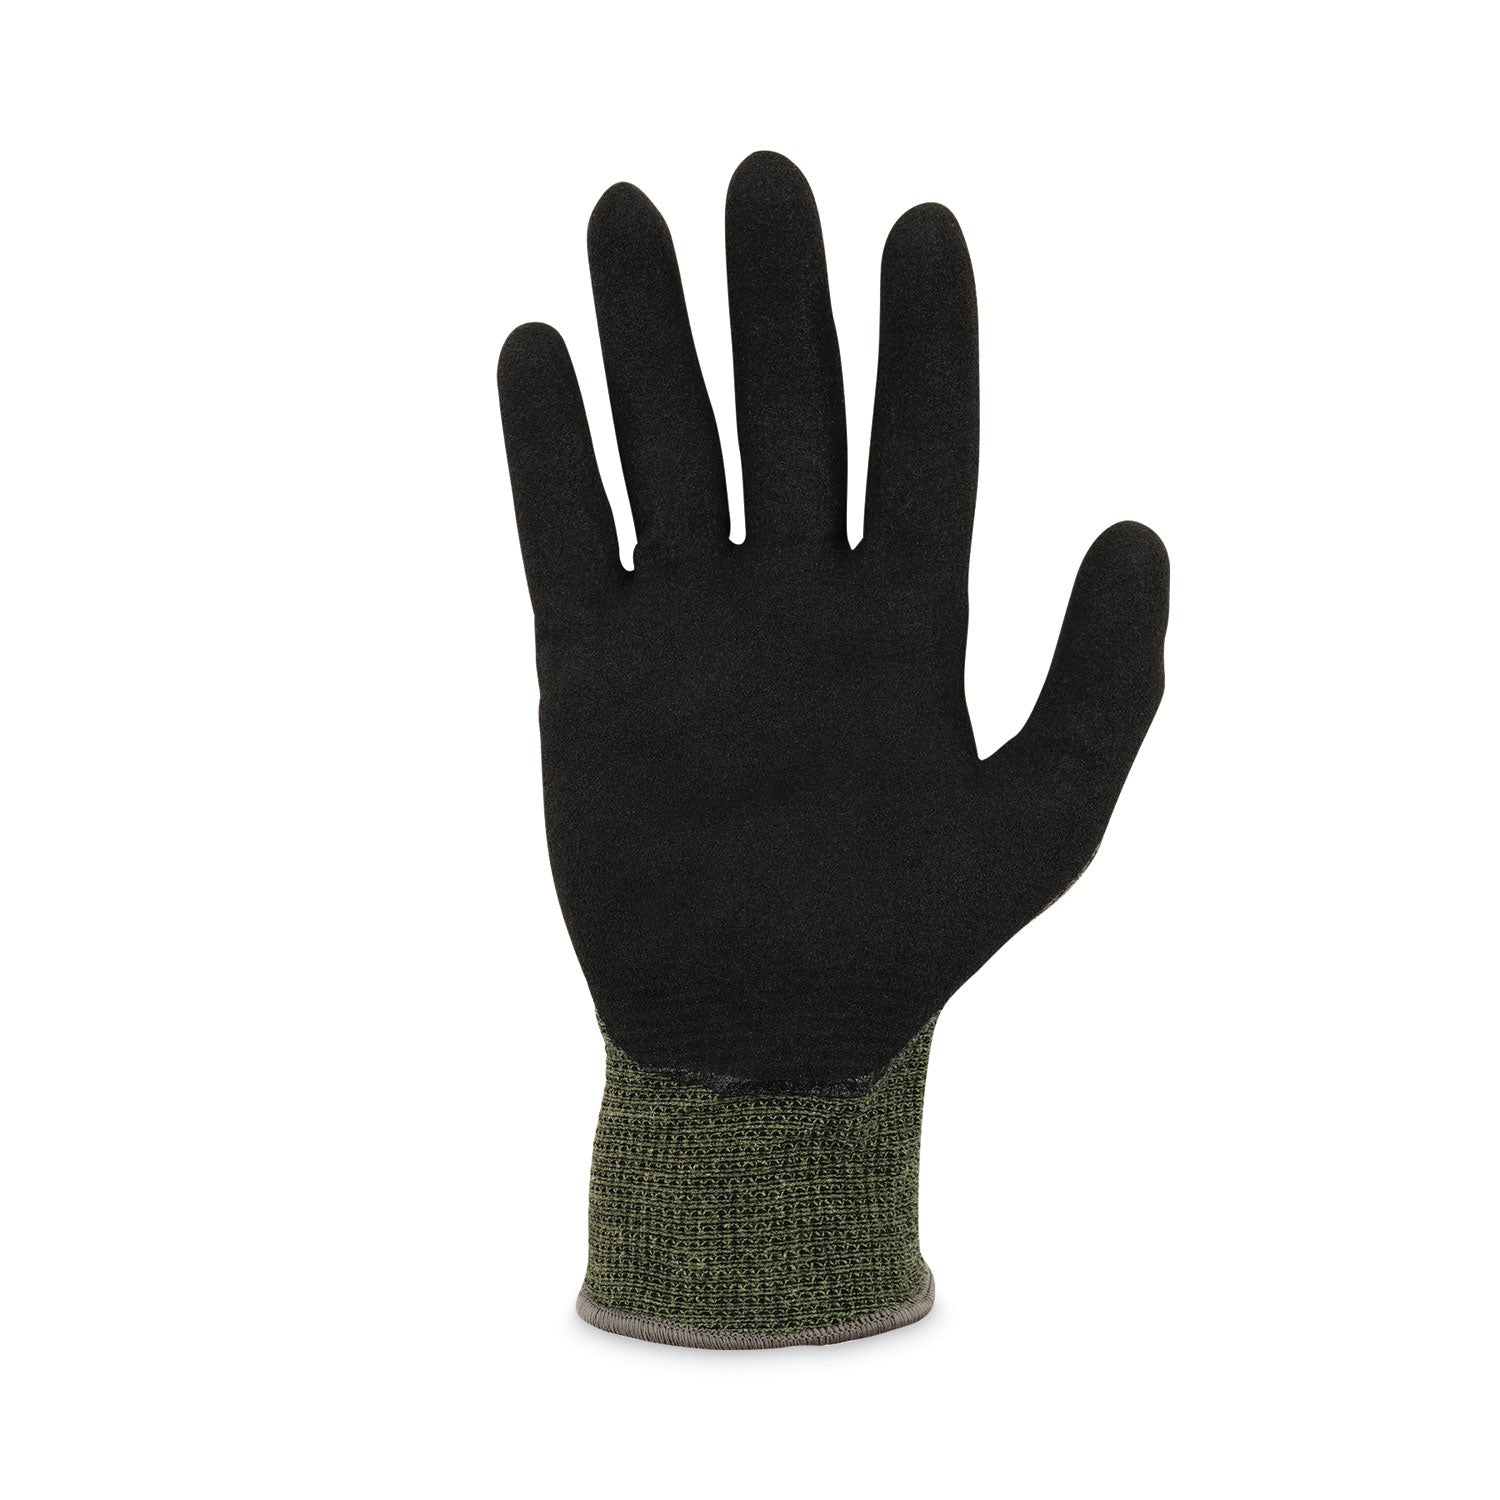 proflex-7042-ansi-a4-nitrile-coated-cr-gloves-green-small-pair-ships-in-1-3-business-days_ego10342 - 6